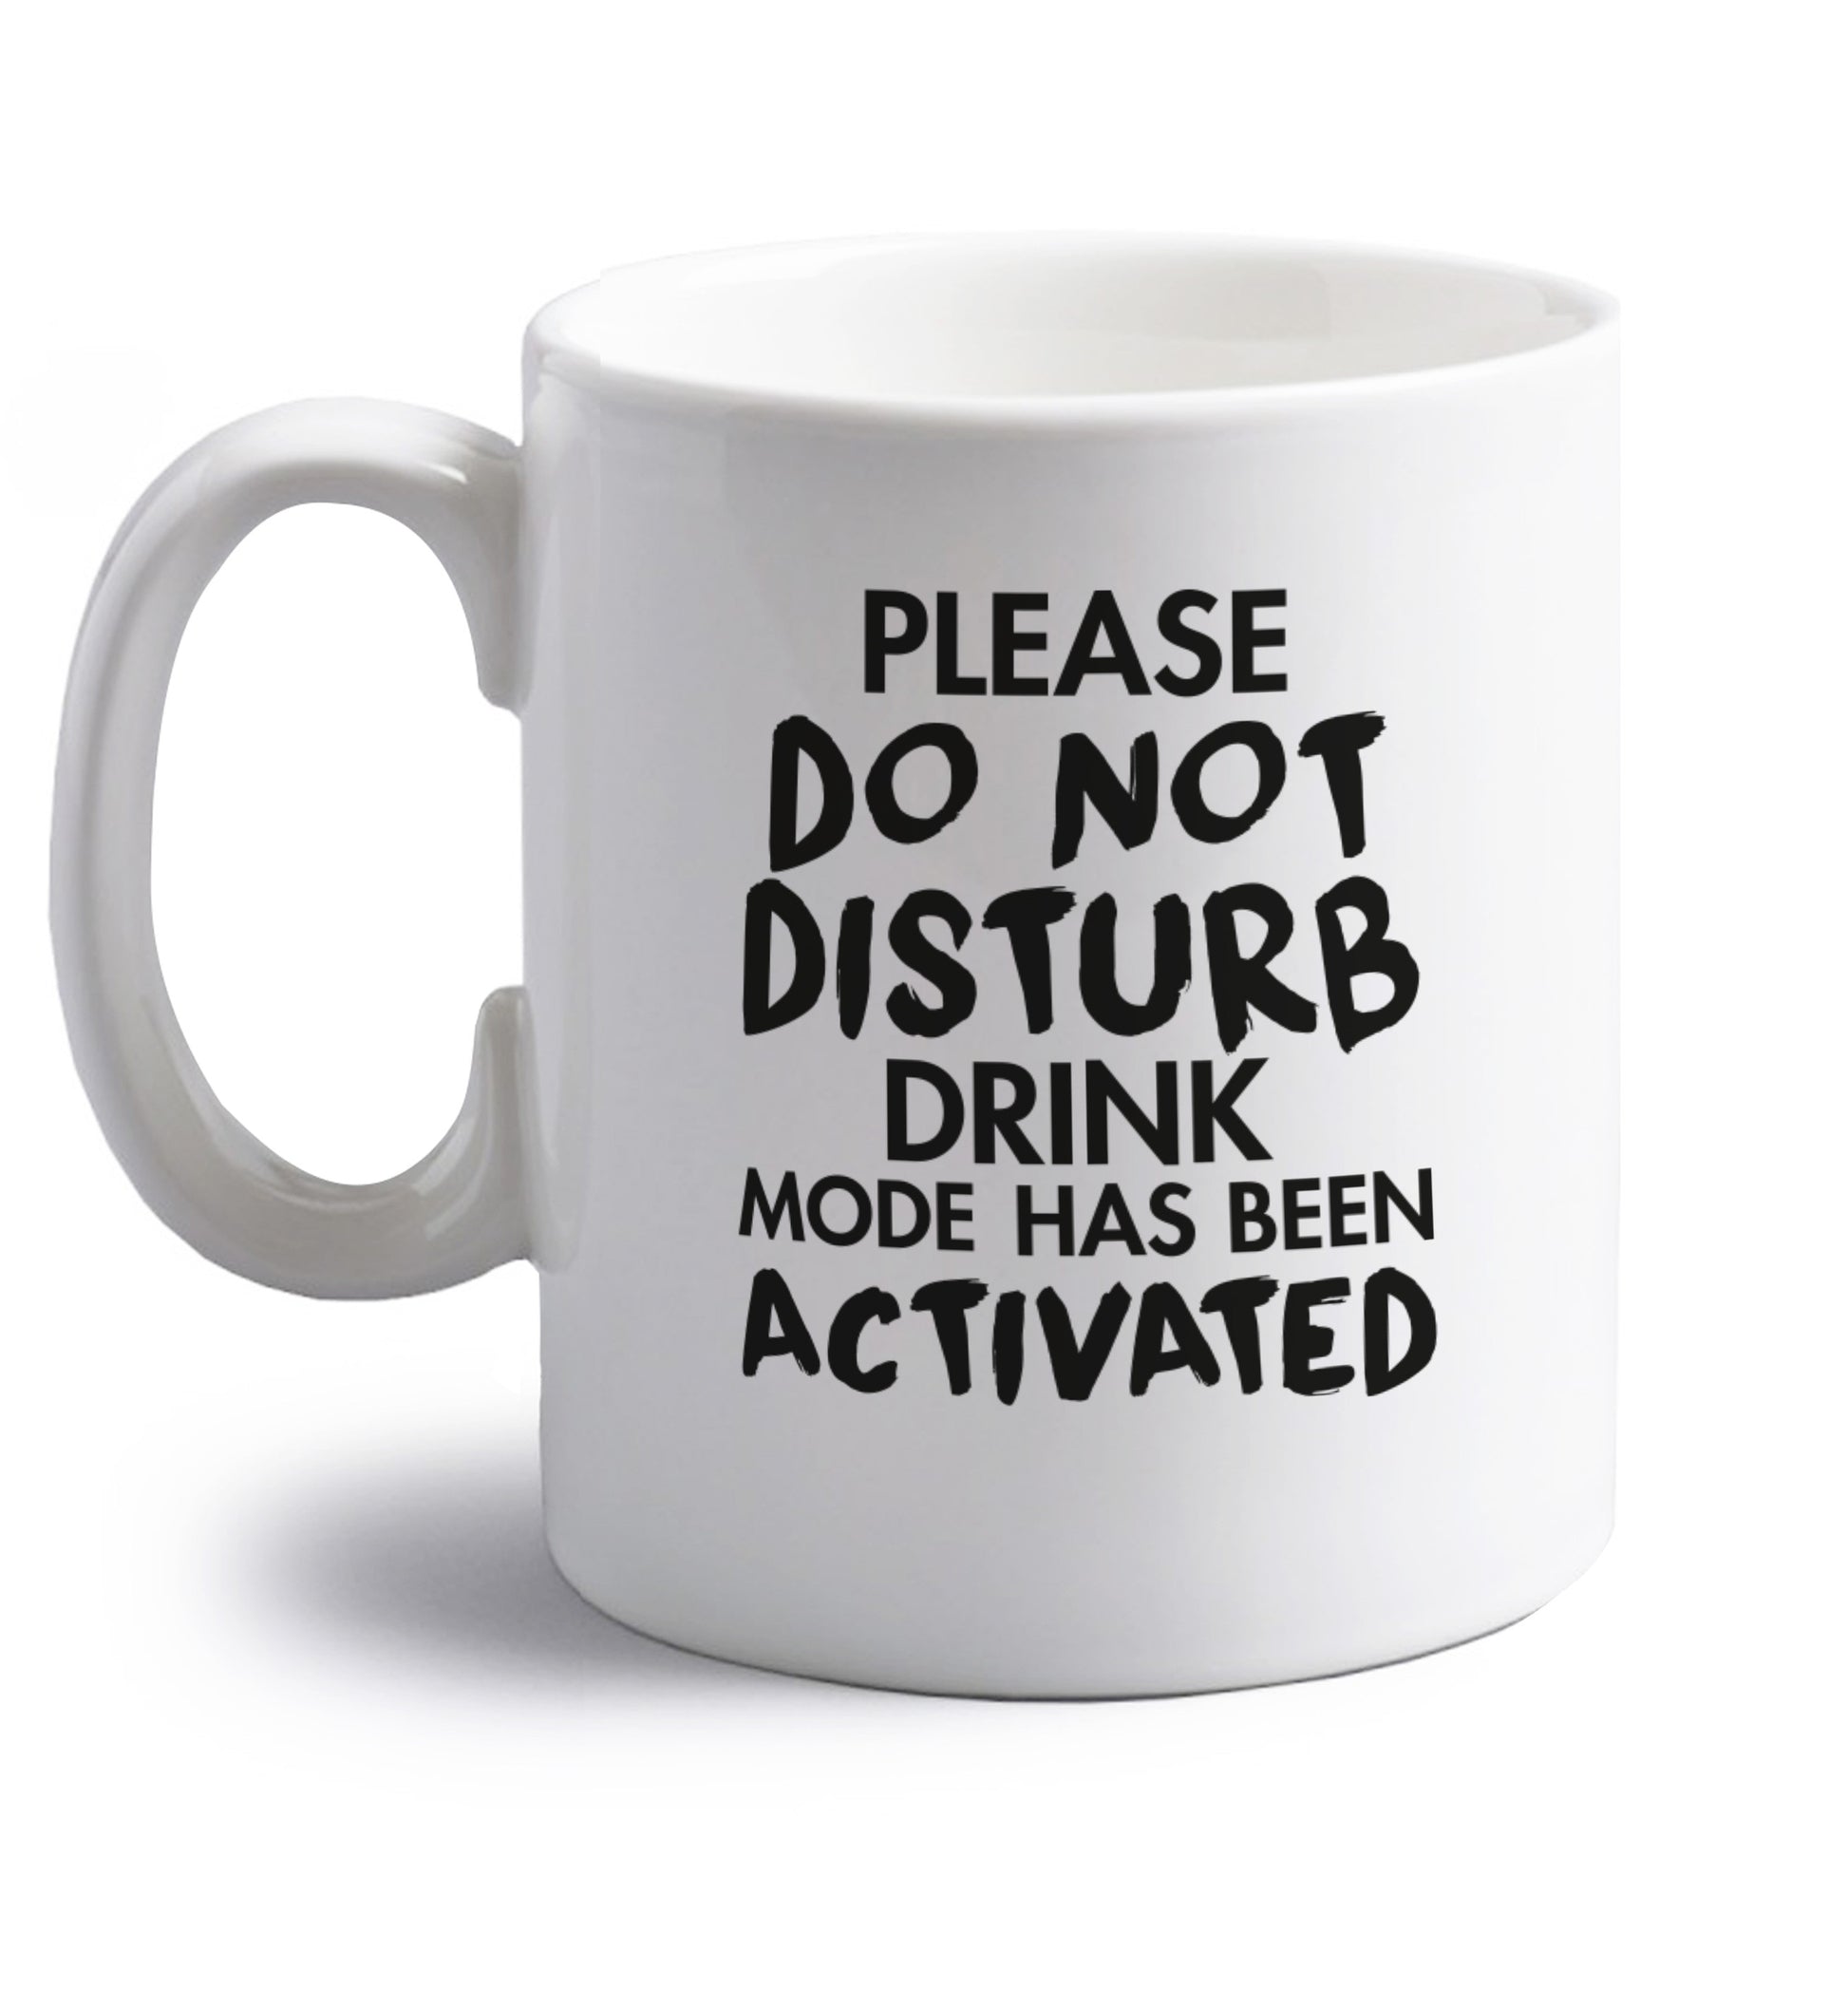 Please do not disturb drink mode has been activated right handed white ceramic mug 